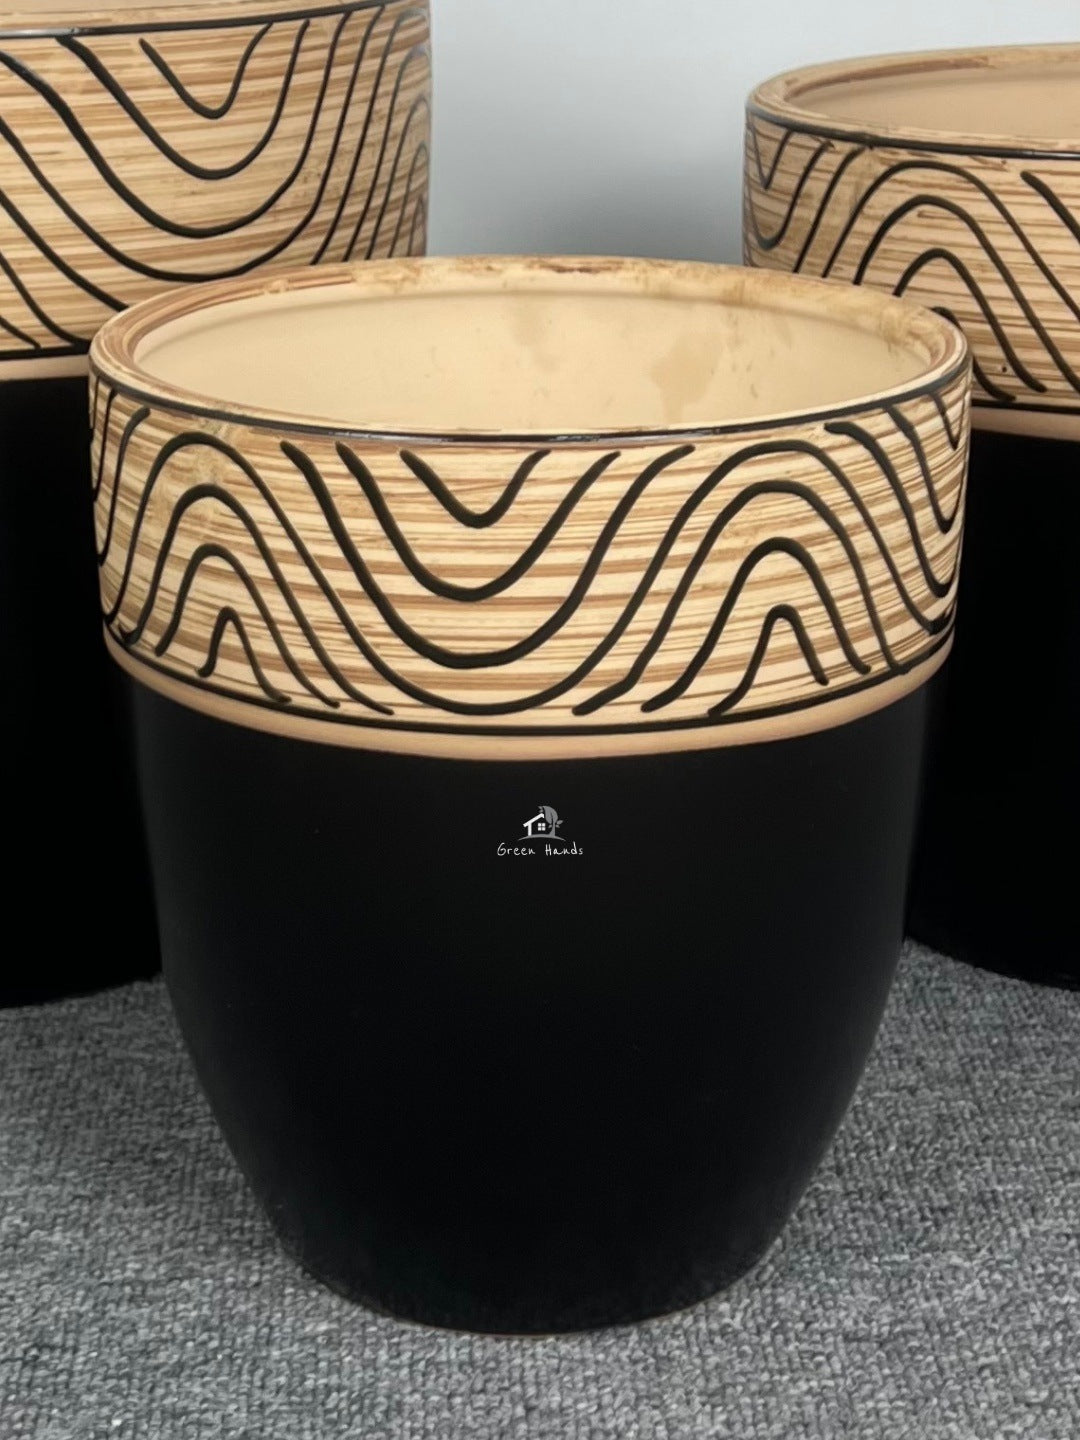 Artistic Black Ceramic Pots with Wooden Carving Finish in Dubai & Abu Dhabi: Natural Design with Drain Holes